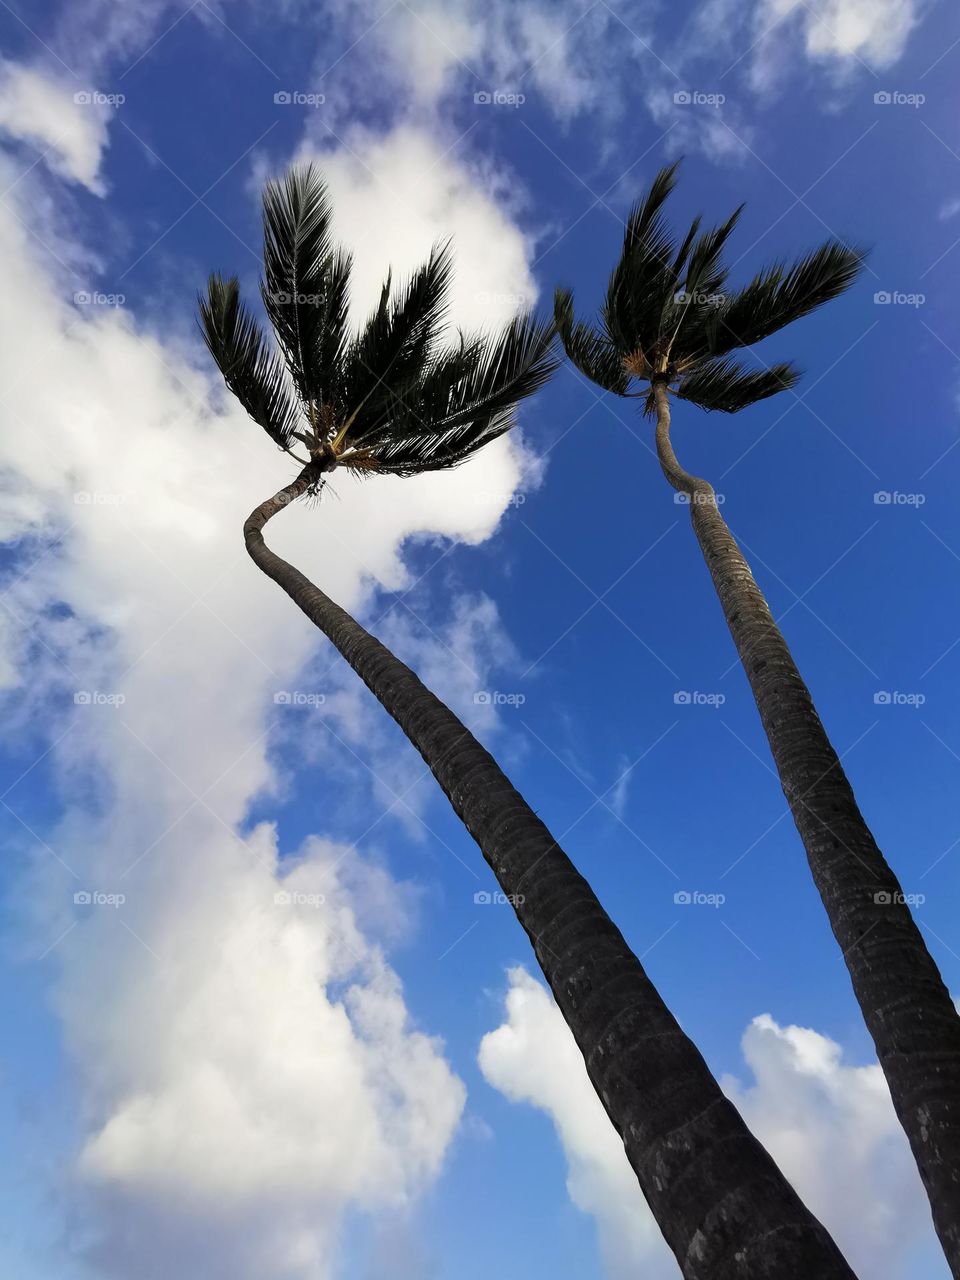 Photo of two palm trees against a blue sky. Beauty of nature. Sunny day in the hot Dominican Republic. Travel memories.